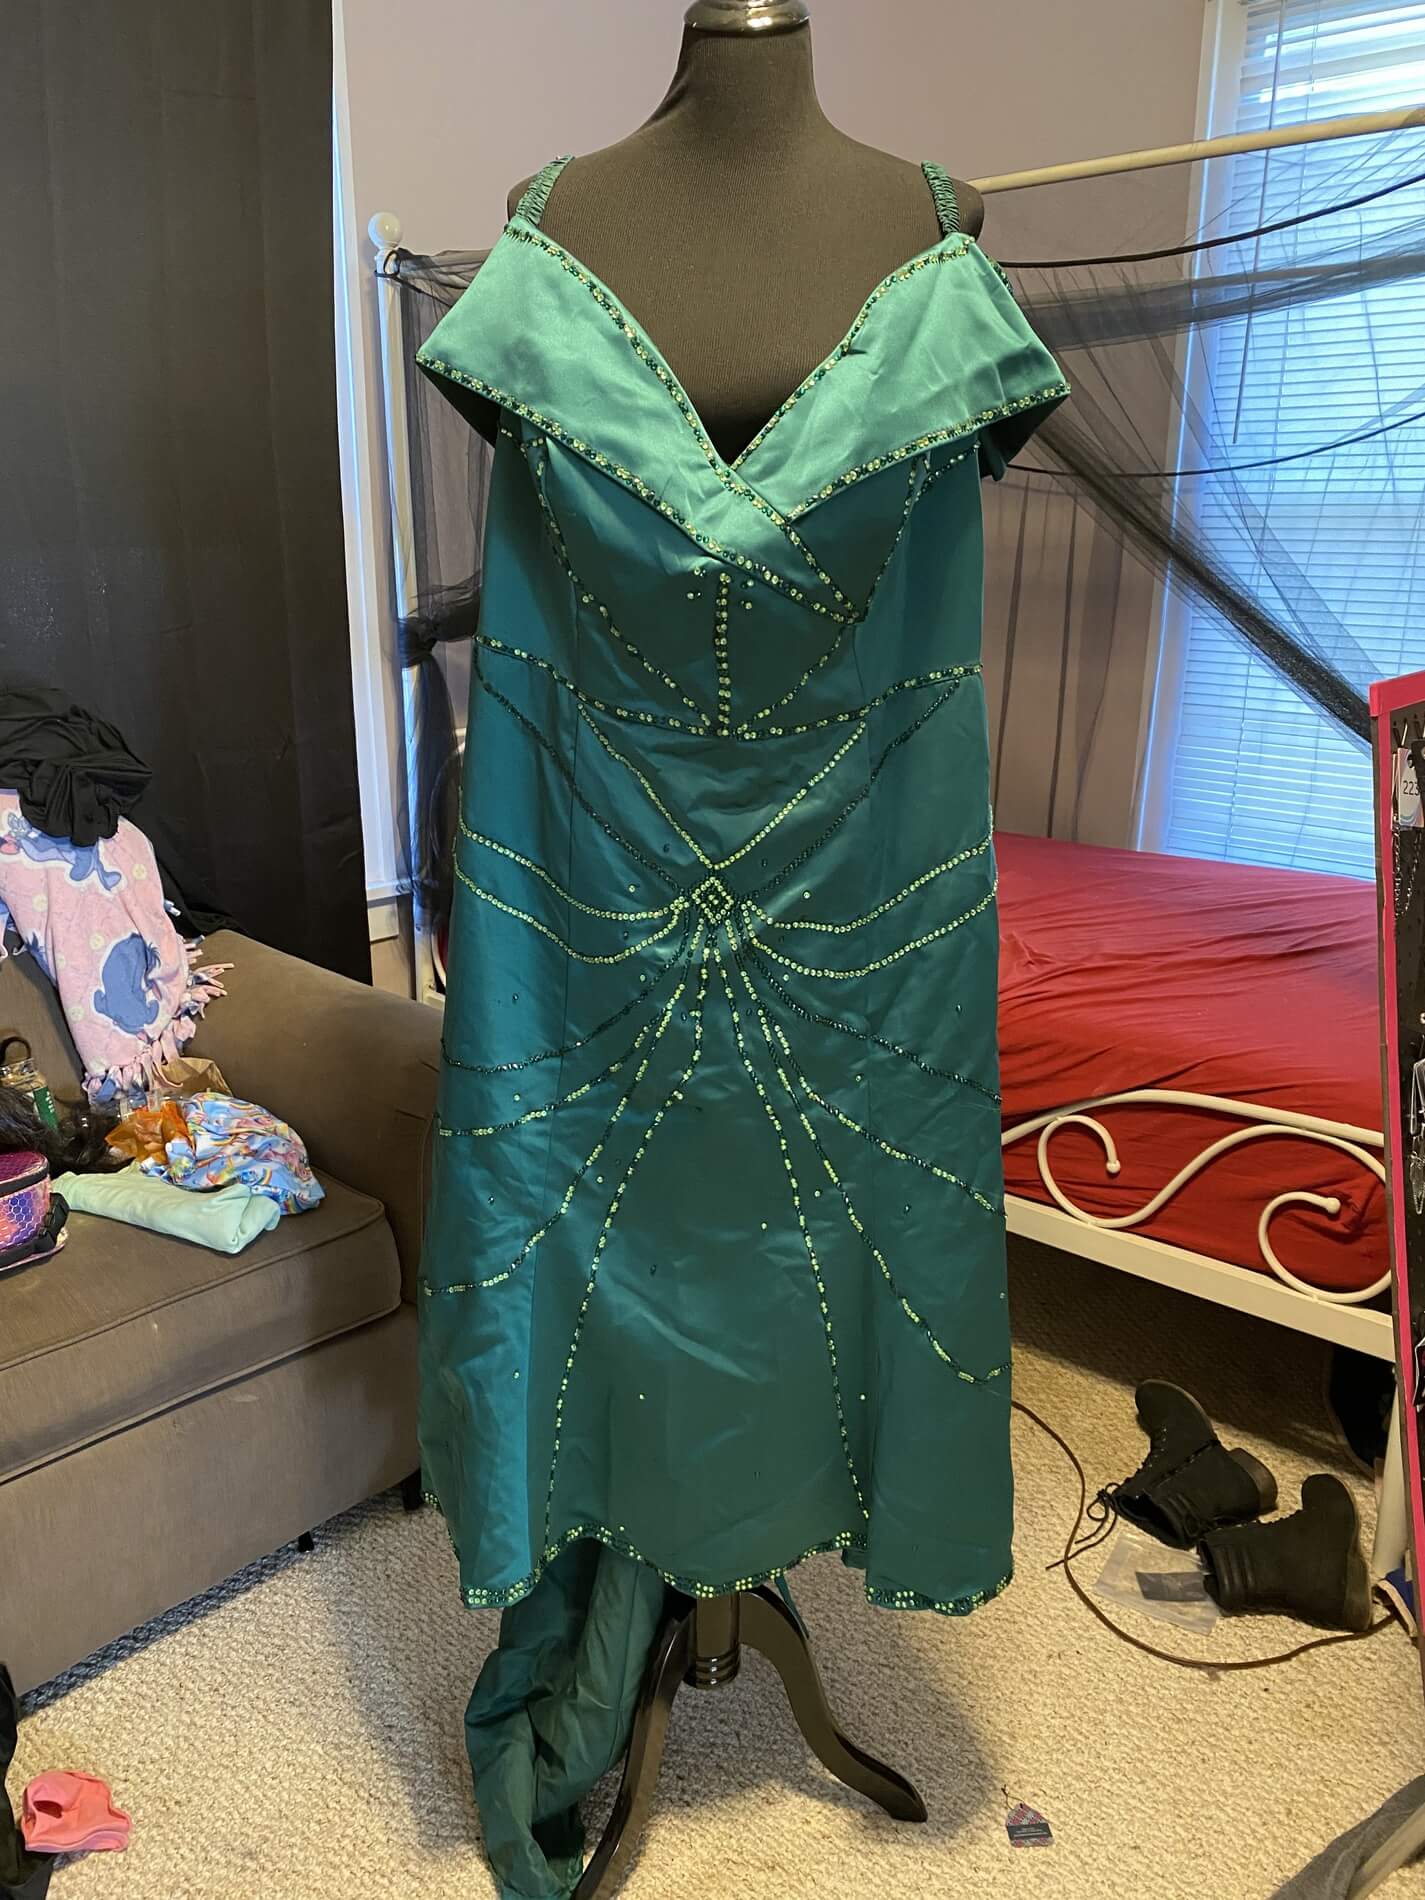 Green Size 18 Train Dress on Queenly